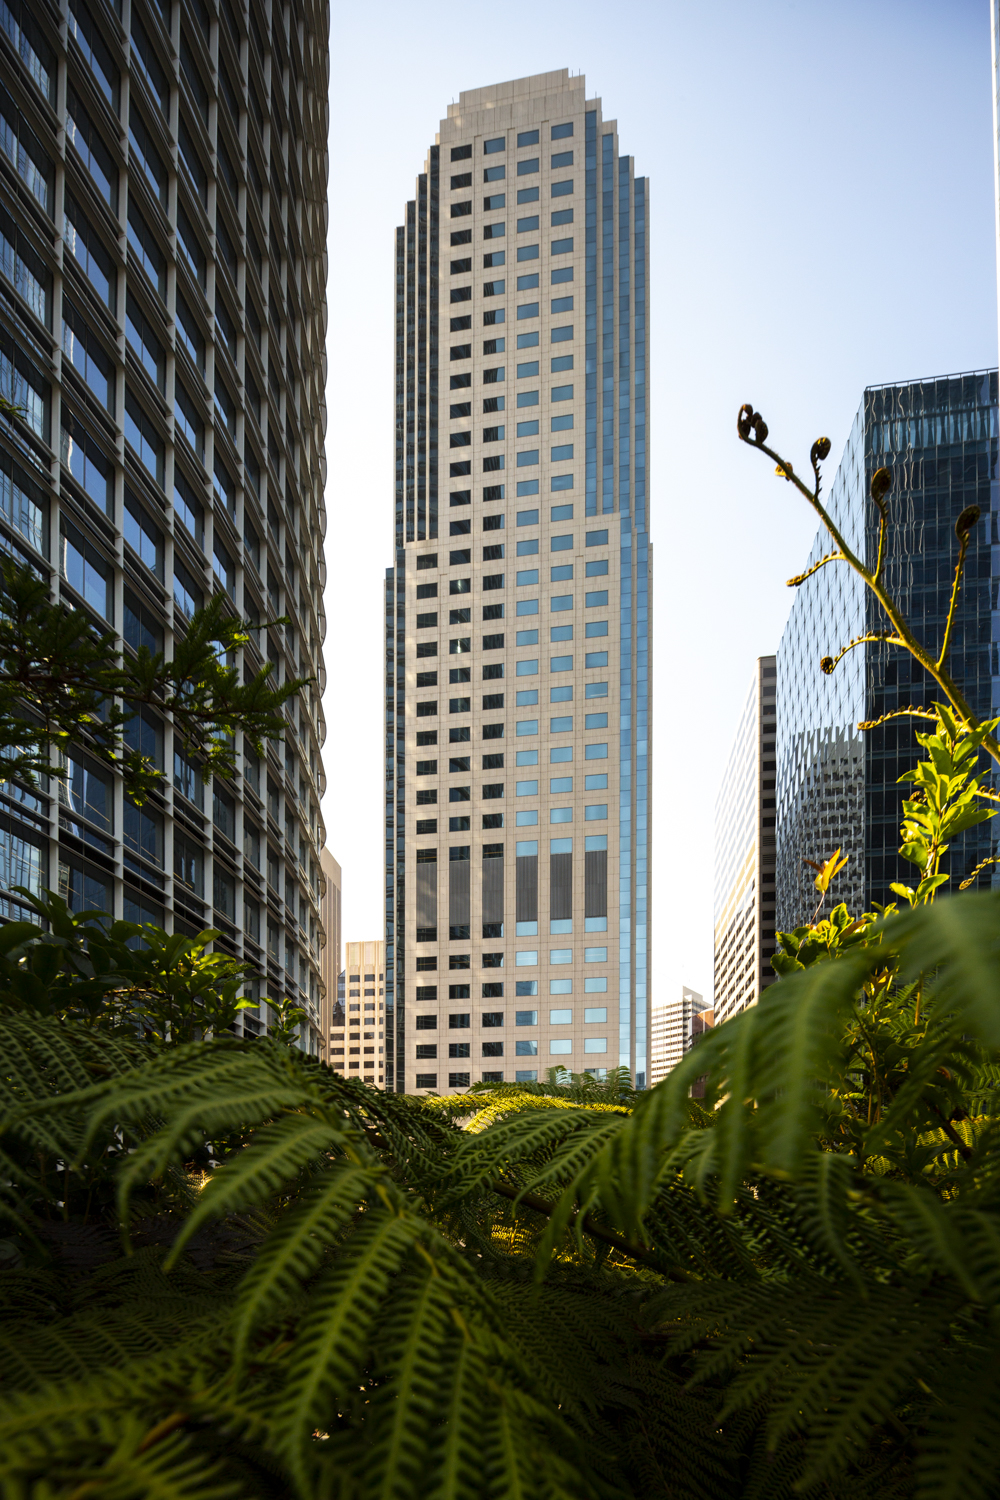 Salesforce West from the Salesforce park, image by Andrew Campbell Nelson